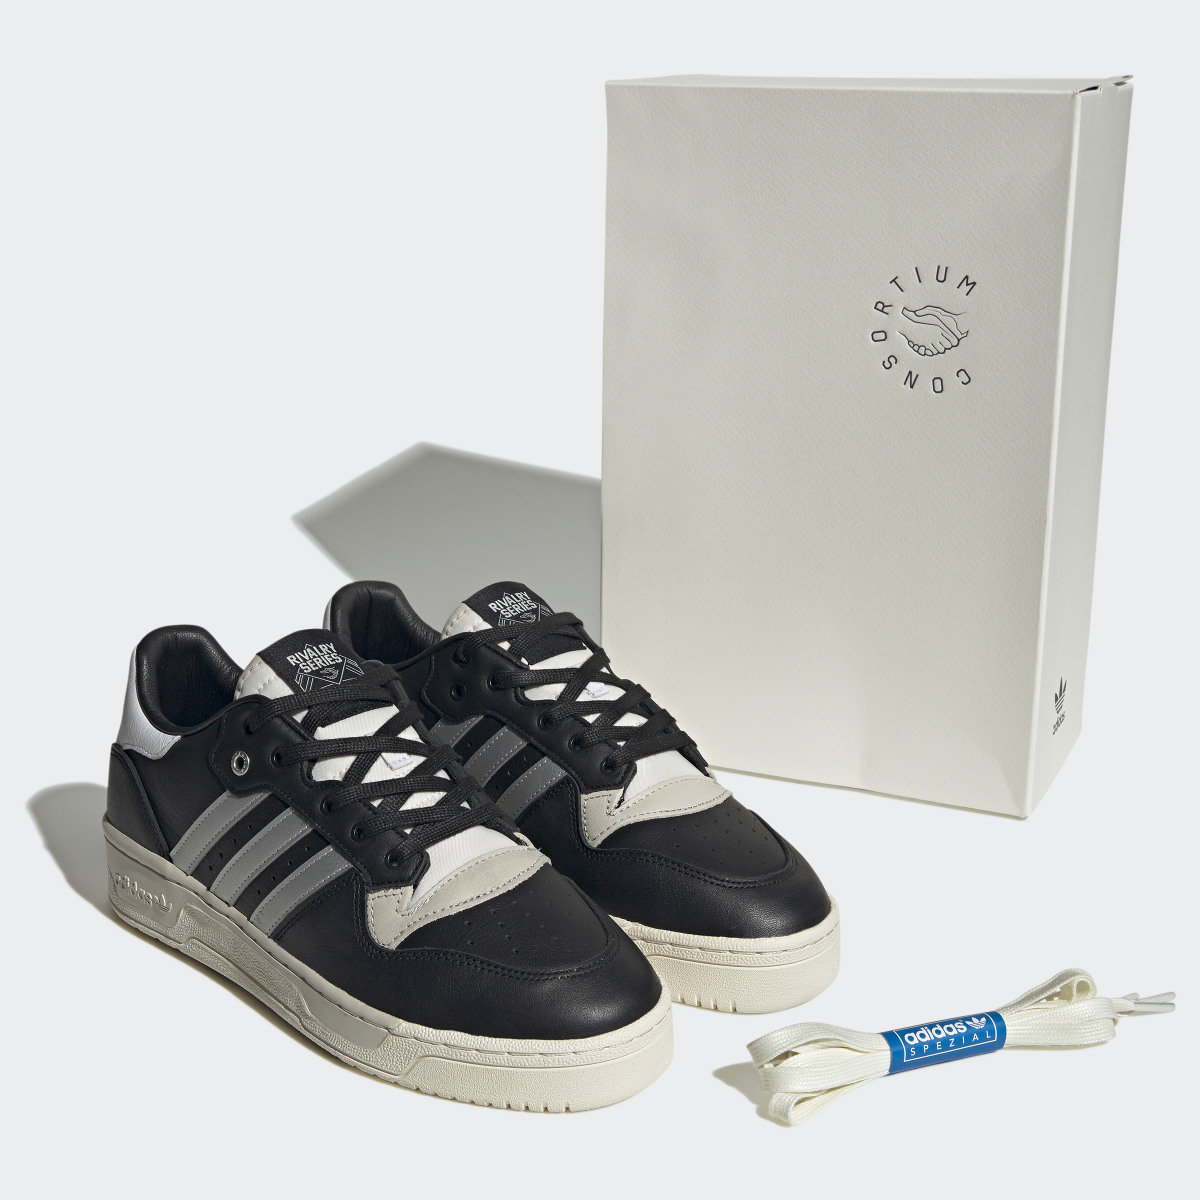 Adidas Chaussure Rivalry Low Consortium. 8